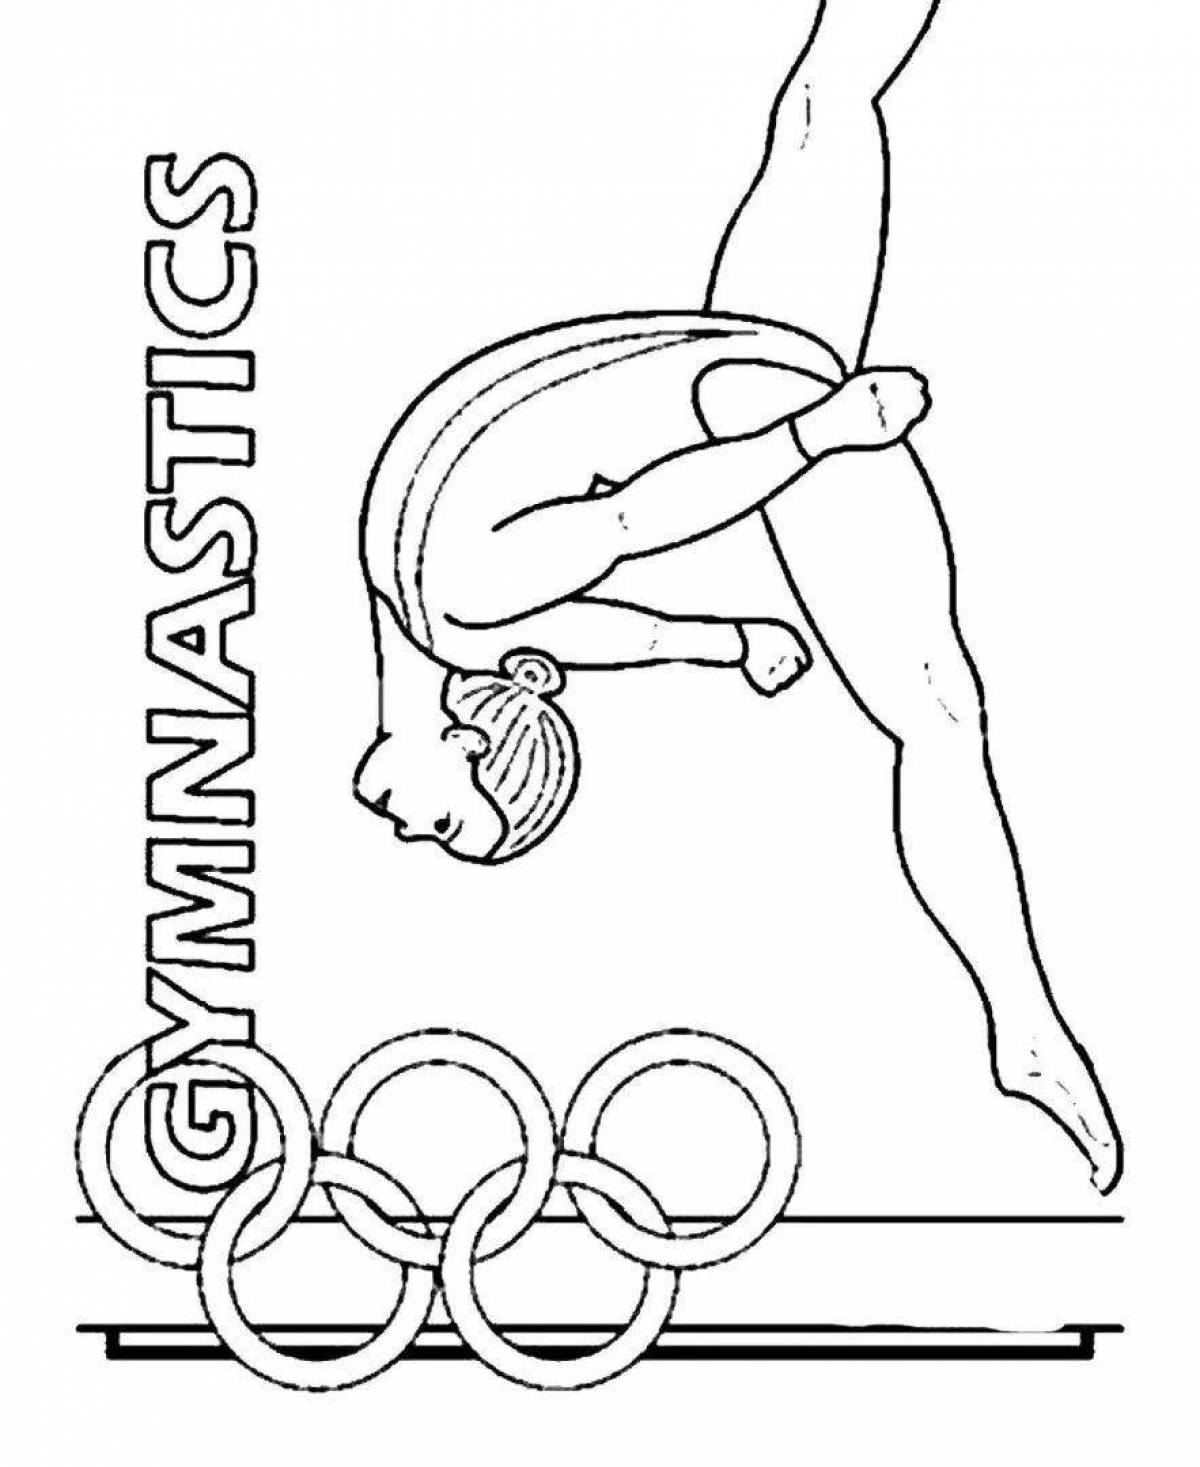 Coloring page gymnast jumping